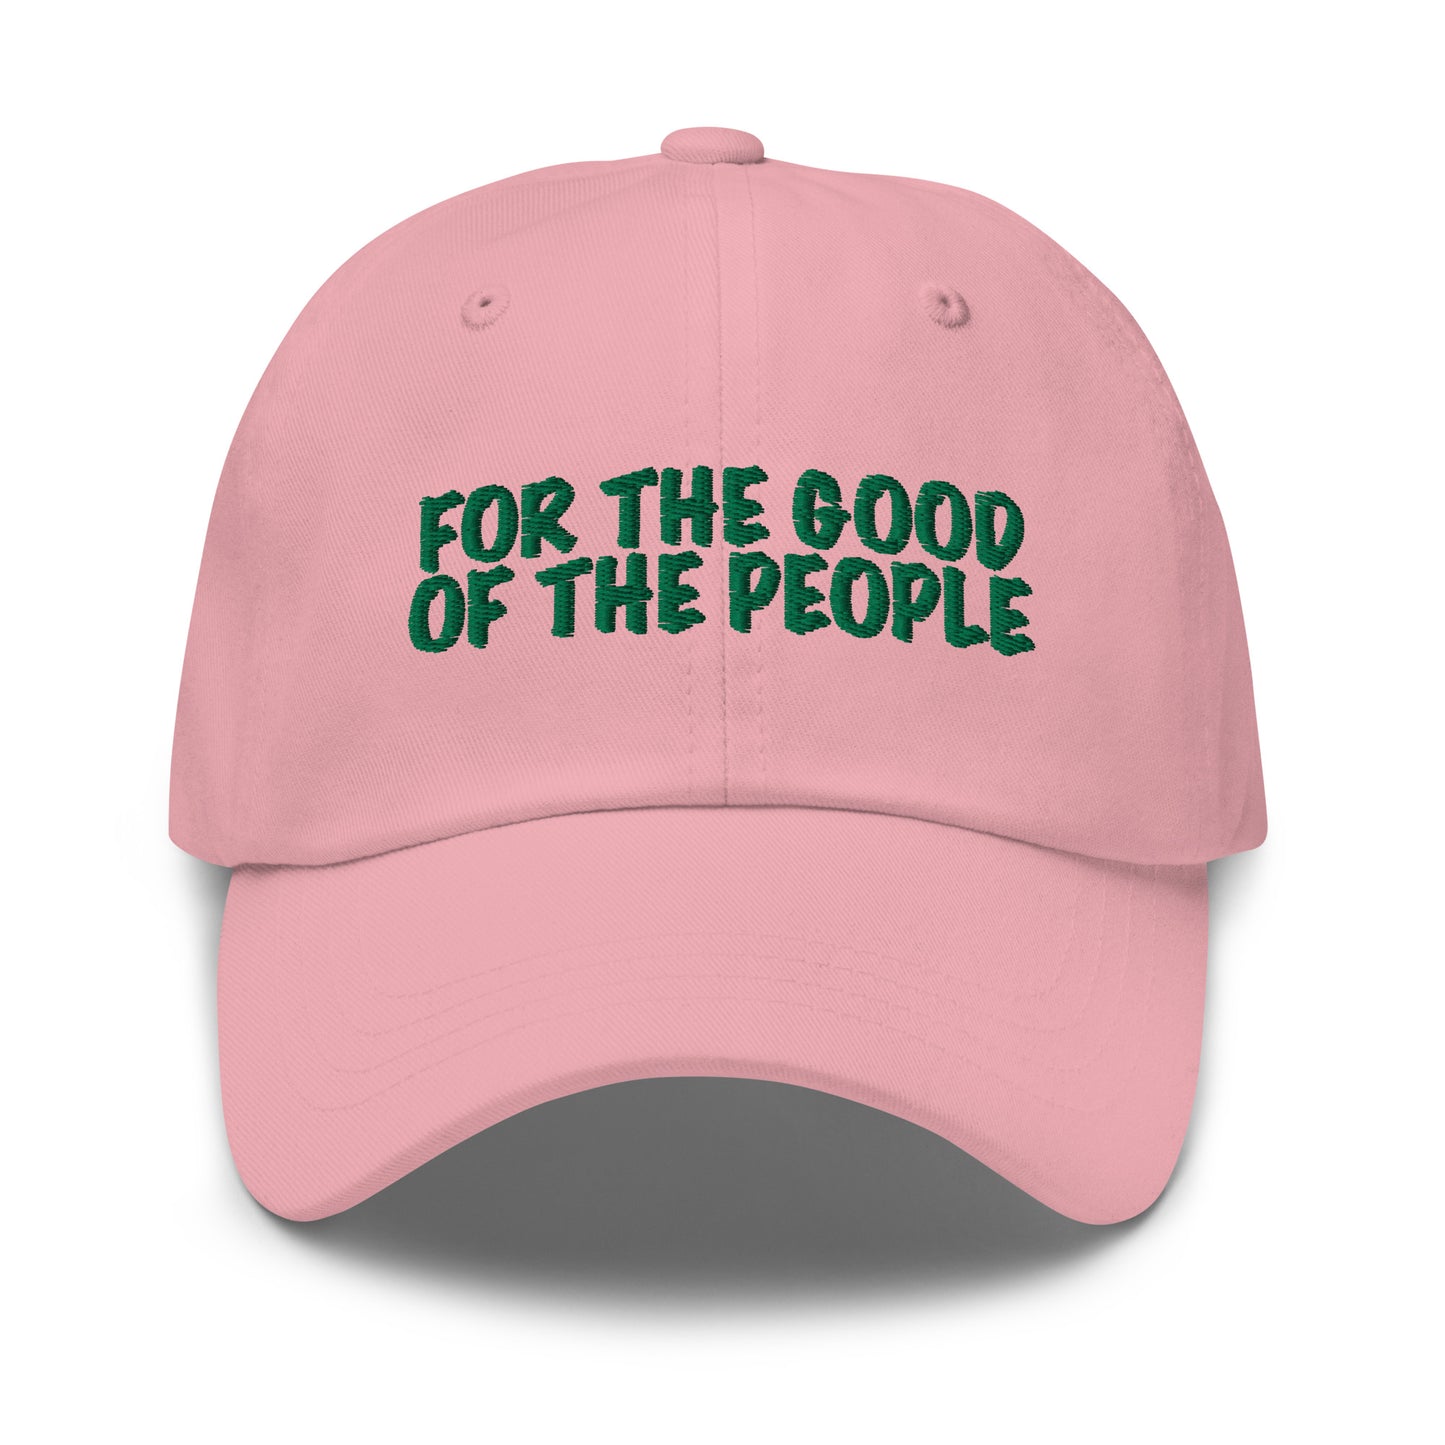 For the good of the people embroidered in green on front of pink dad hat.